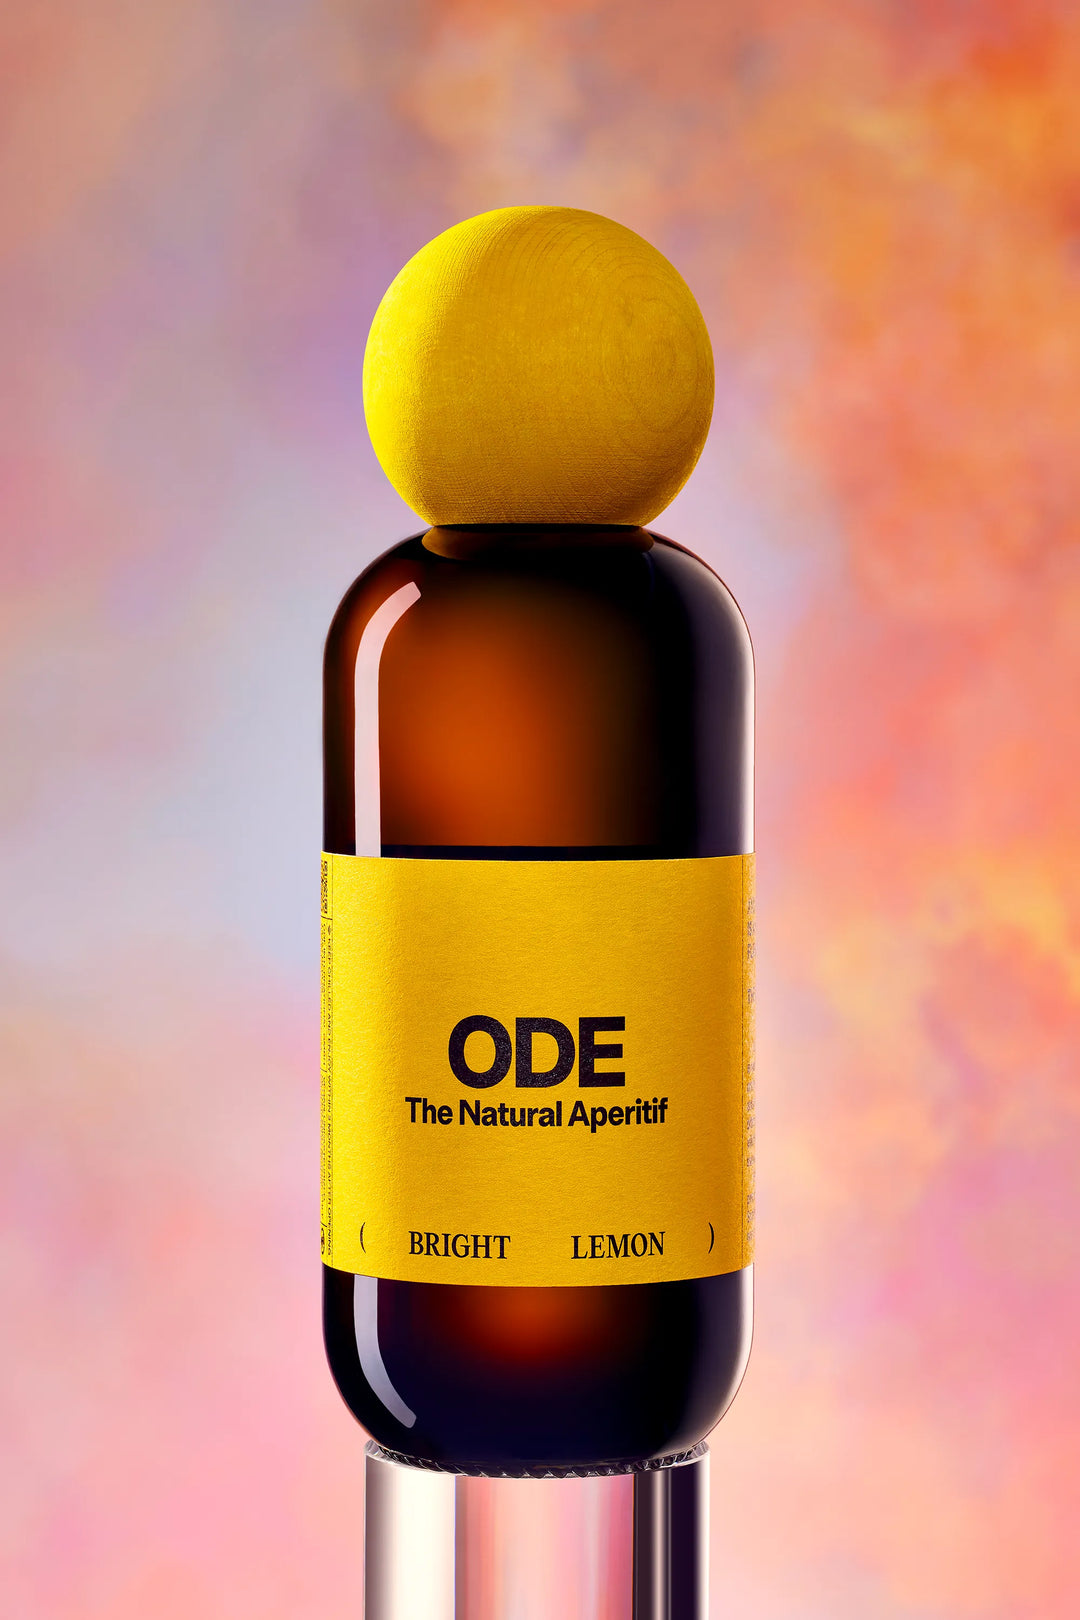 ODE Bright Lemon. Wine-Aperitif. Made in Berlin. Bitter, sweet and Sour.